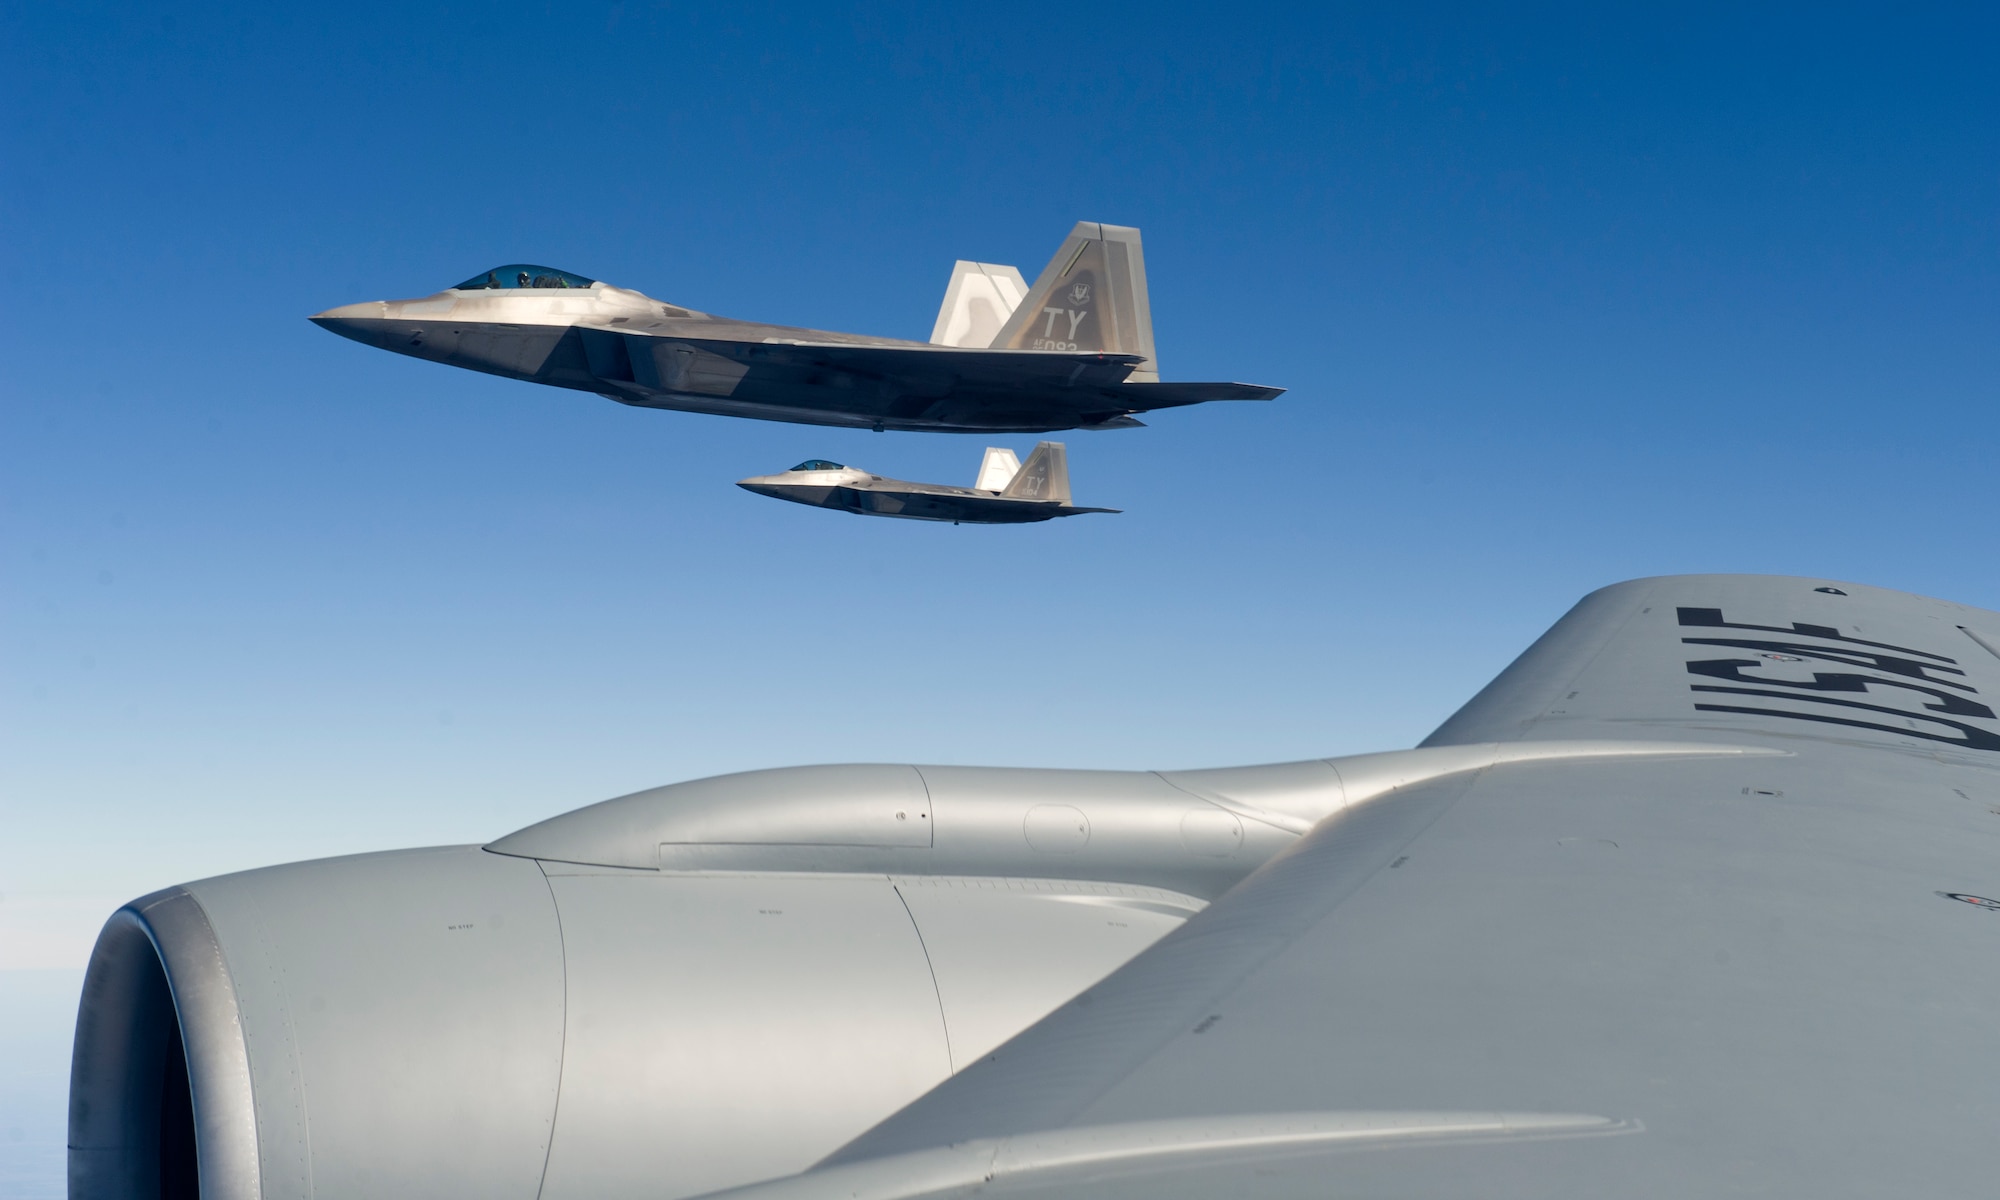 A 95th Fighter Squadron F-22 Raptor is refueled en route to Nellis AFB by a KC-135 Stratotanker from the 126th Air Refueling Wing, Scott AFB, Illinois, Jan. 19. Twelve F-22’s and more than 200 Airmen from Tyndall are participating in Red Flag 16-1. This joint, full-spectrum exercise provides the most realistic combat training available. (U.S. Air Force photo by Senior Airman Alex Fox Echols III/Released)  